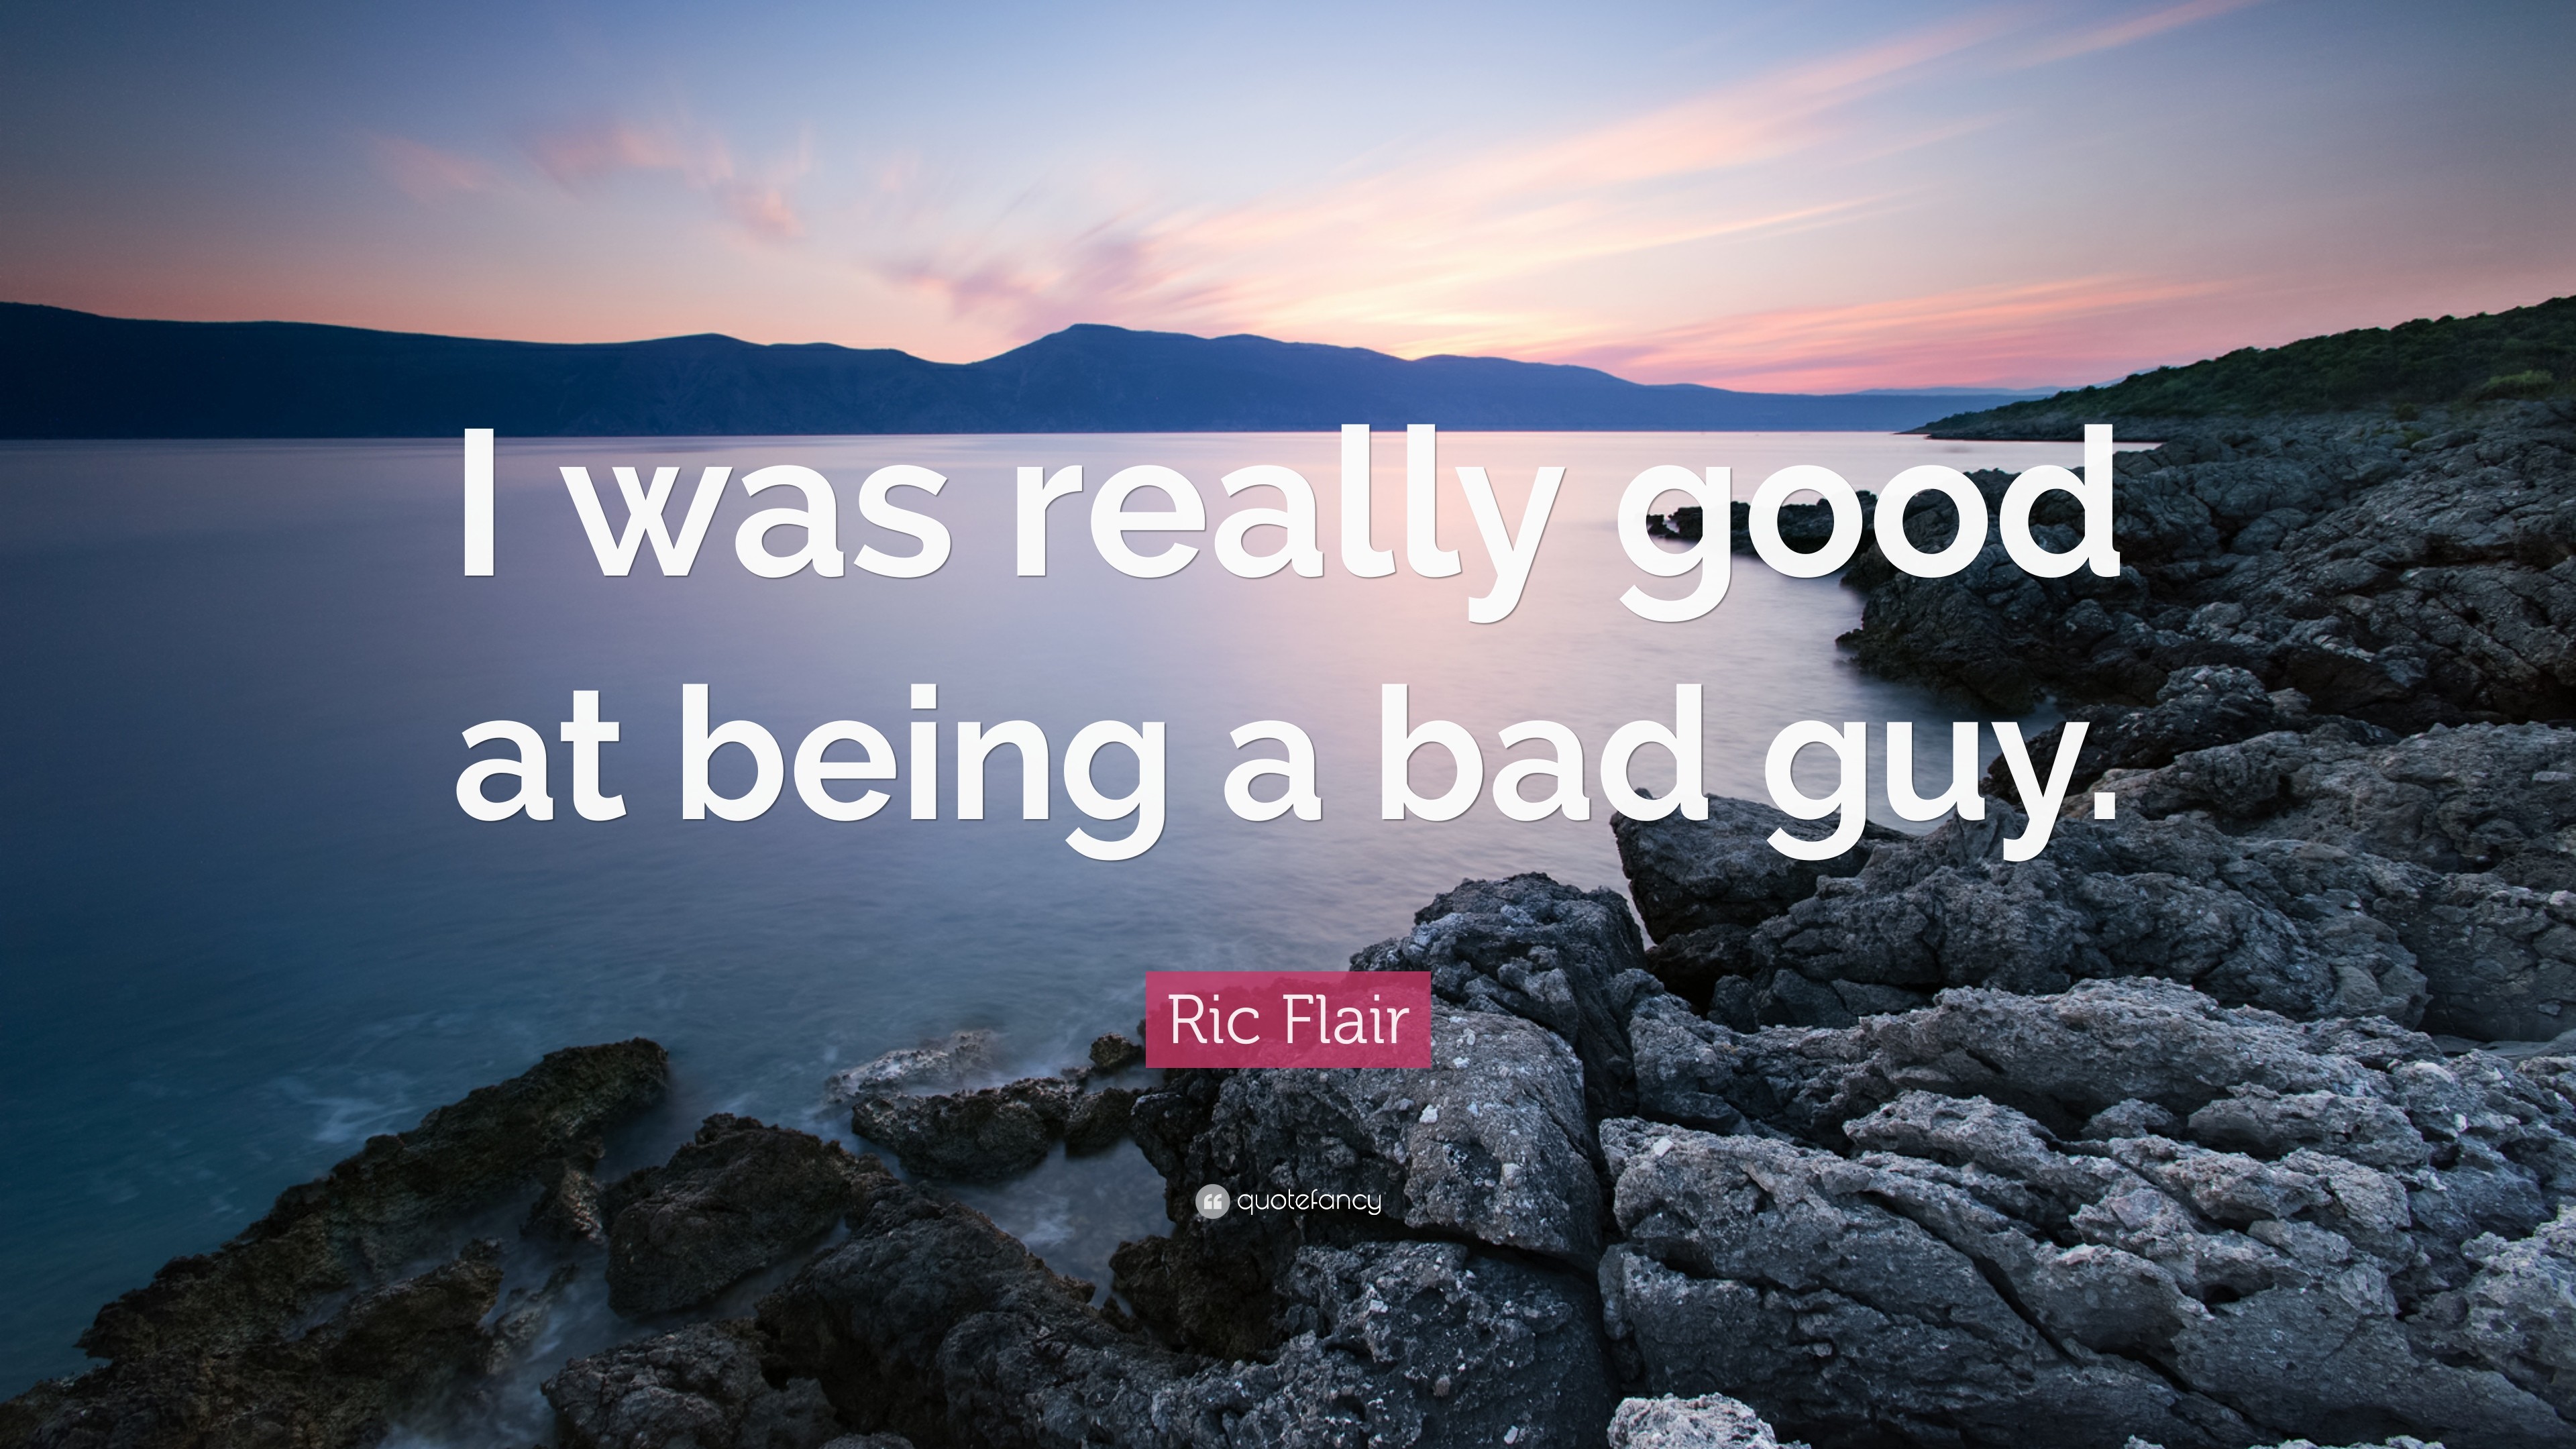 3840x2160 Ric Flair Quote: “I was really good at being a bad guy.”